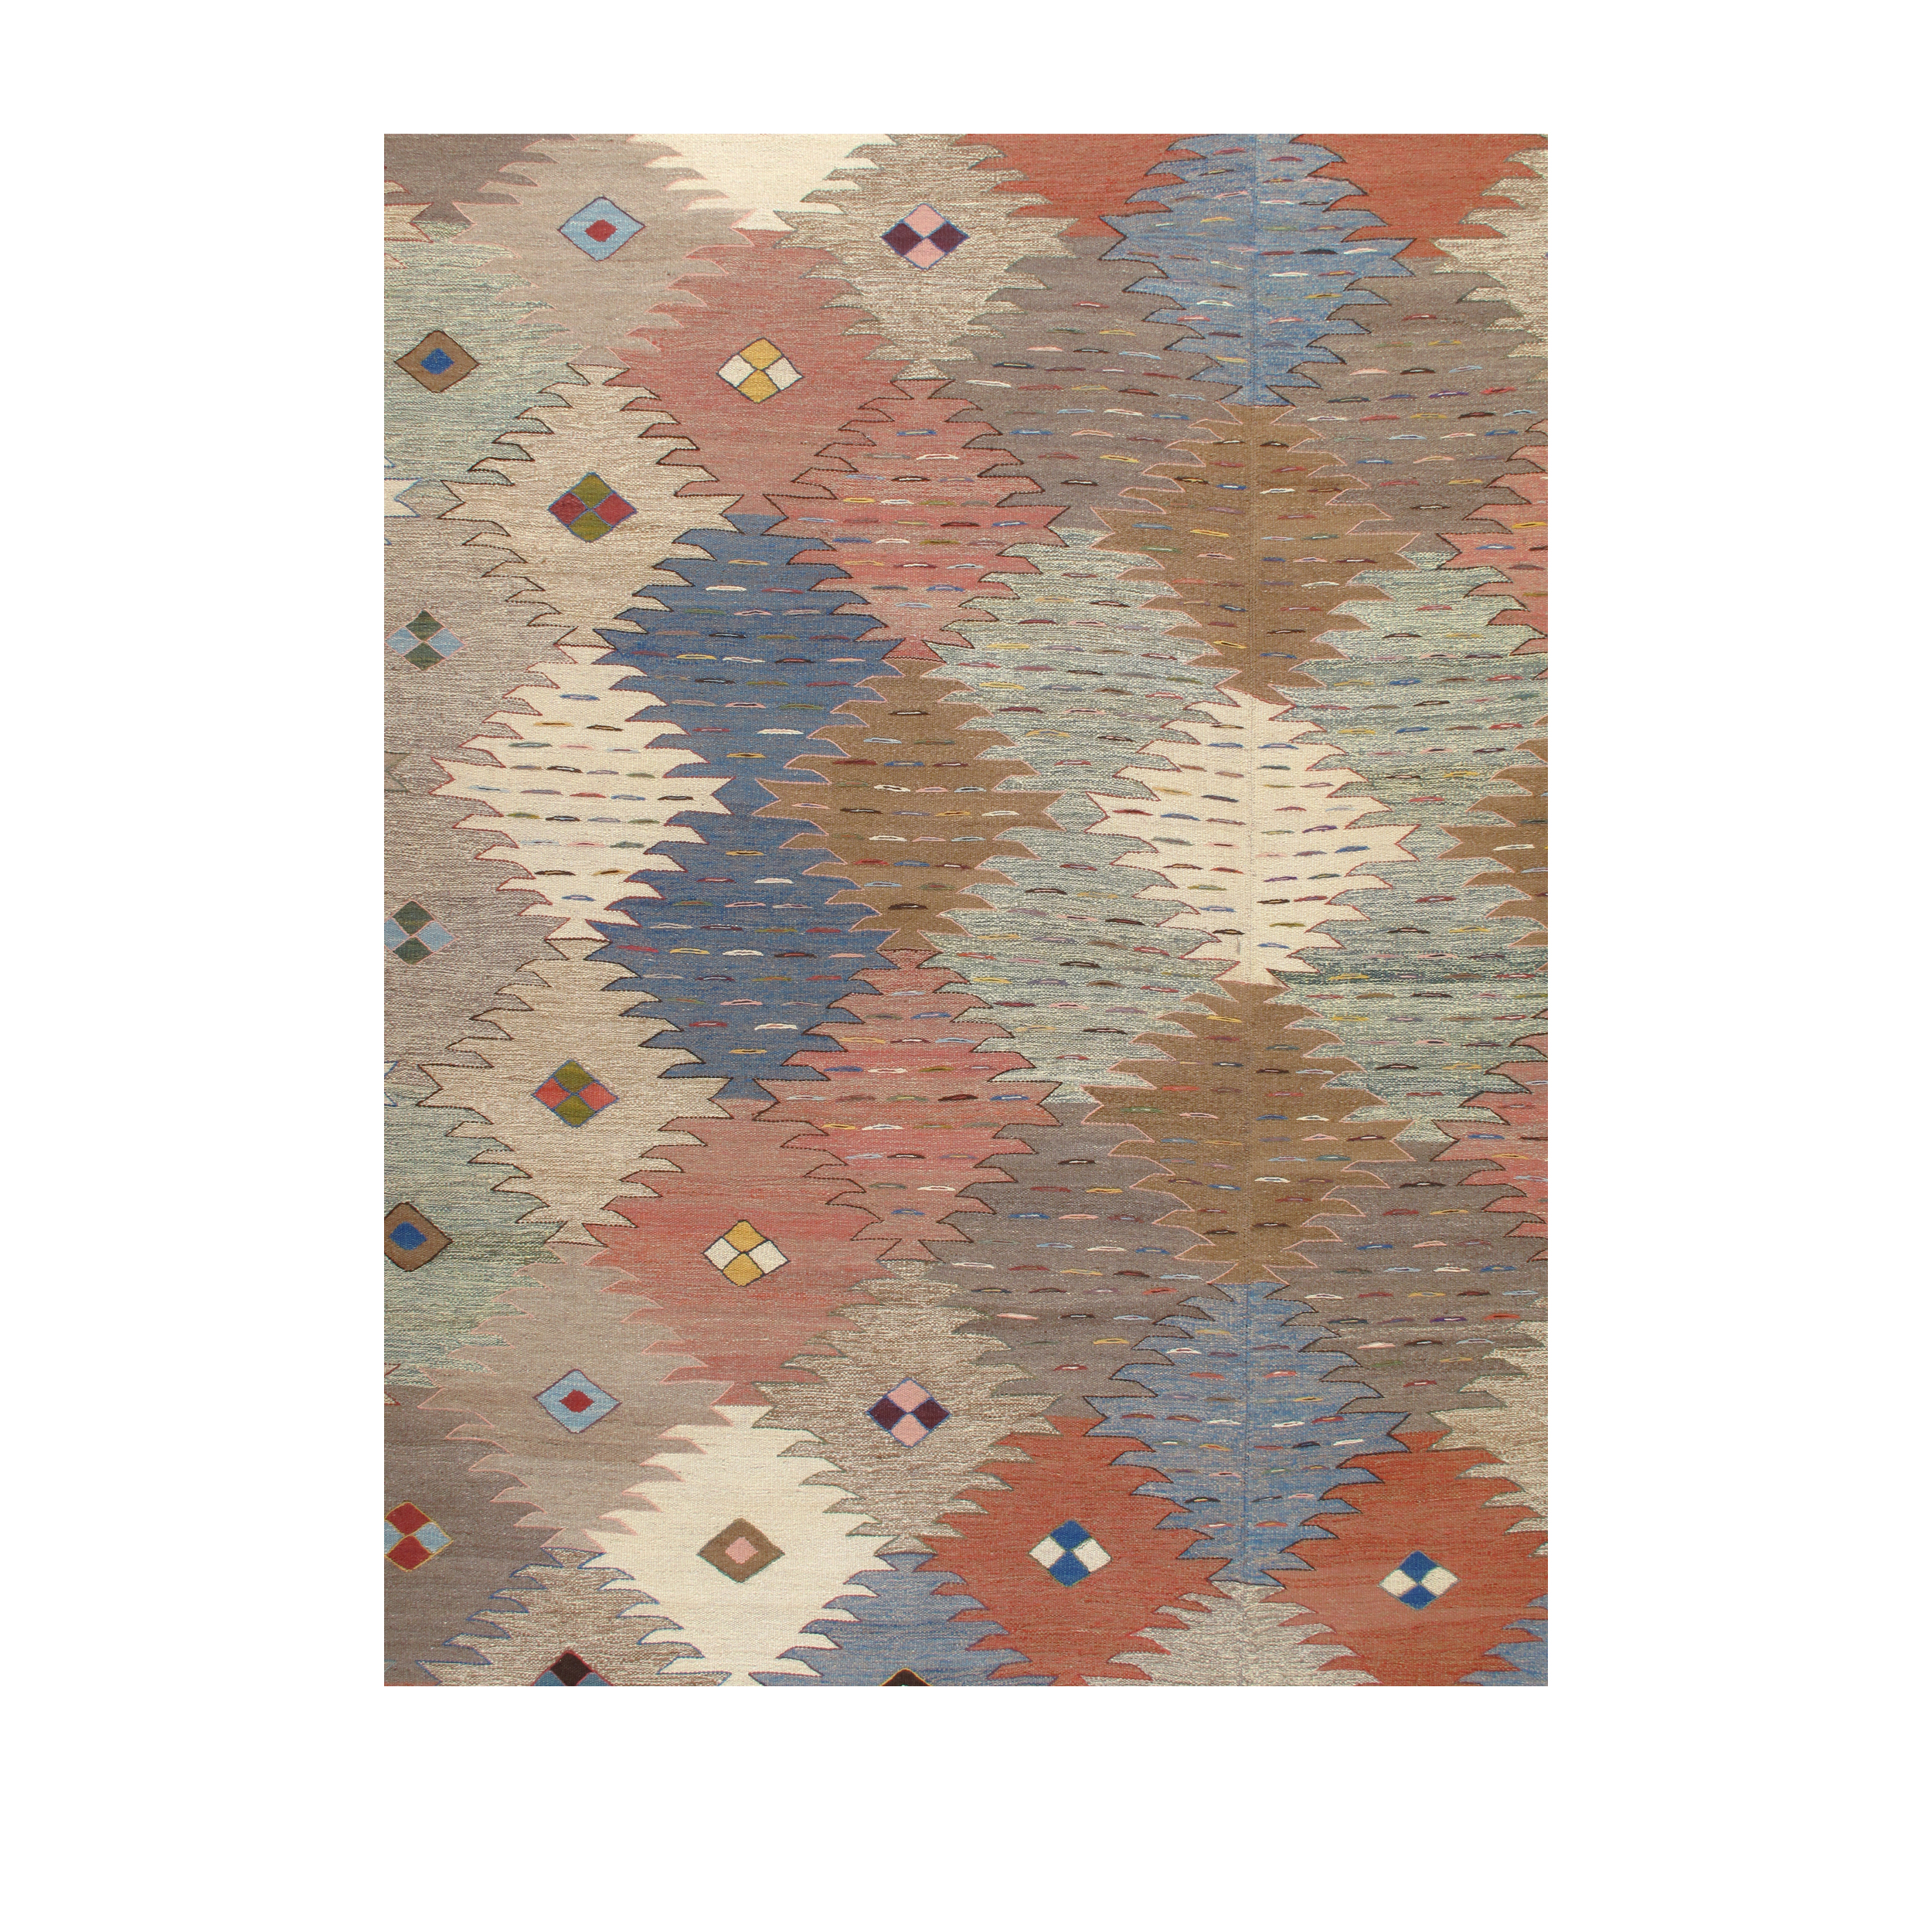 Kalach rug is a flatweave resembling antique Turkish Kilims from the 19th century and earlier. 